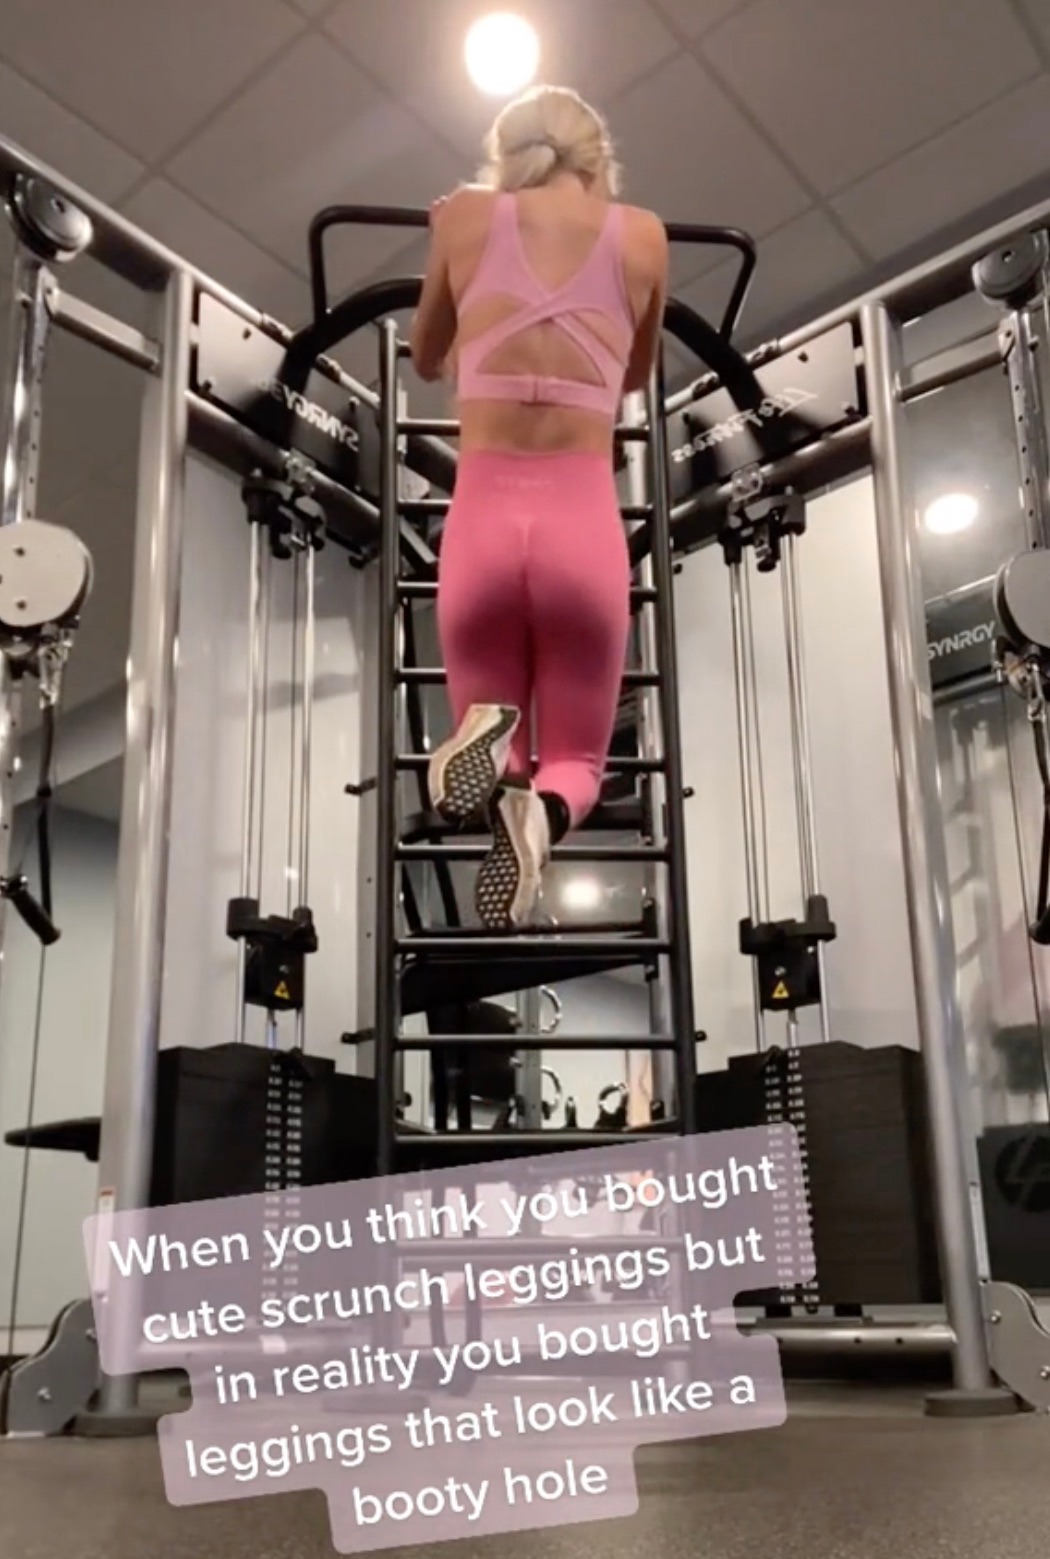 She was embarrassed watching herself back in the gym